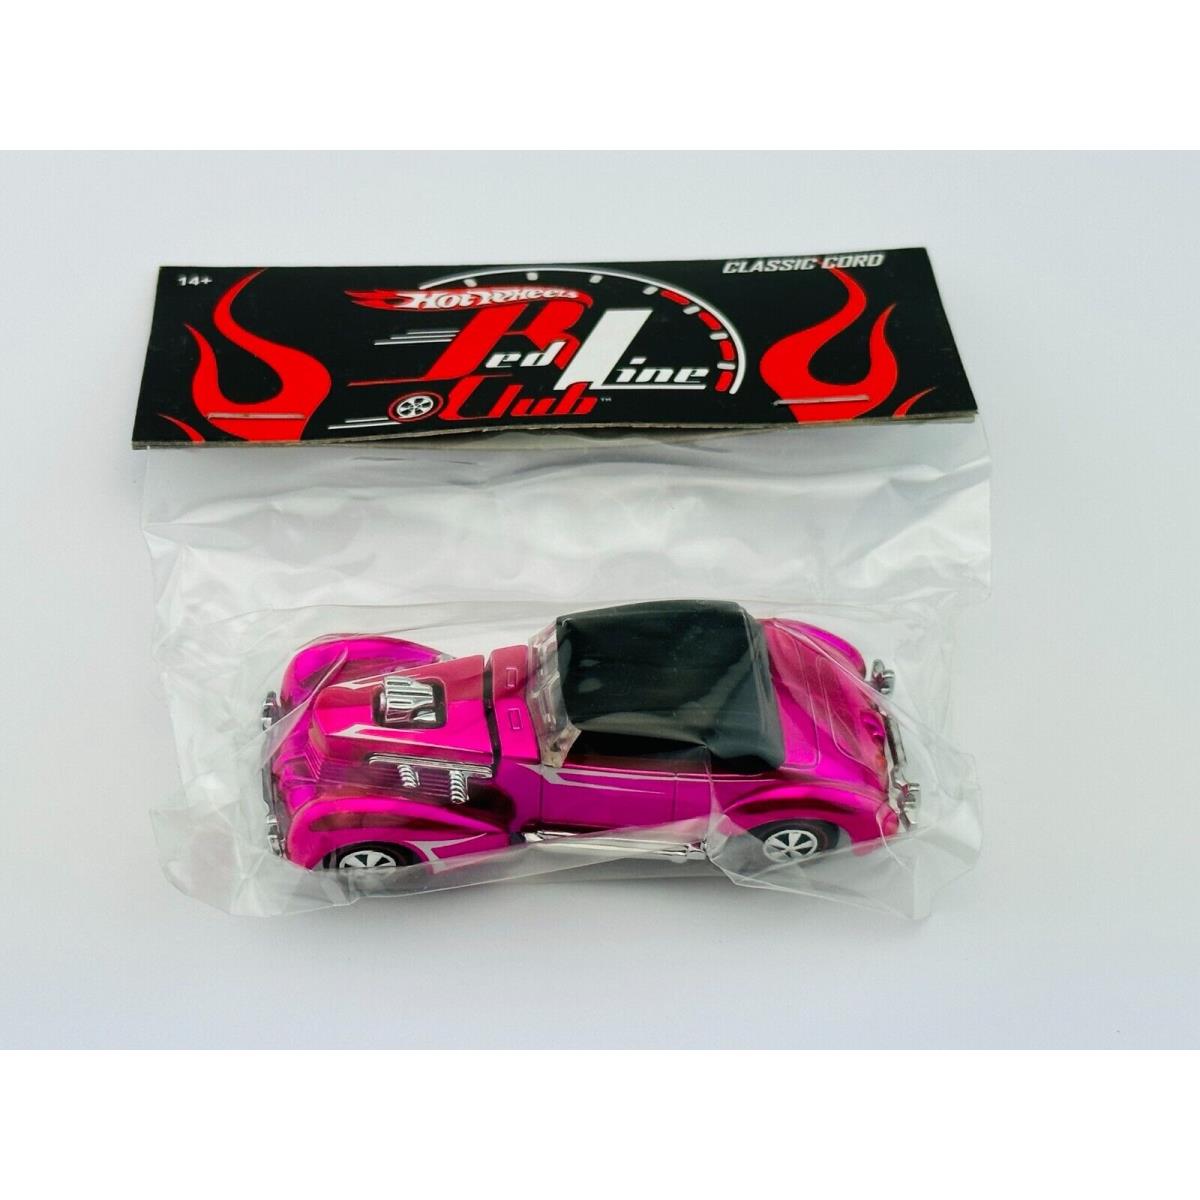 Hot Wheels Rlc 2006 Convention Nationals Classic Cord Pink Party Car in Baggie